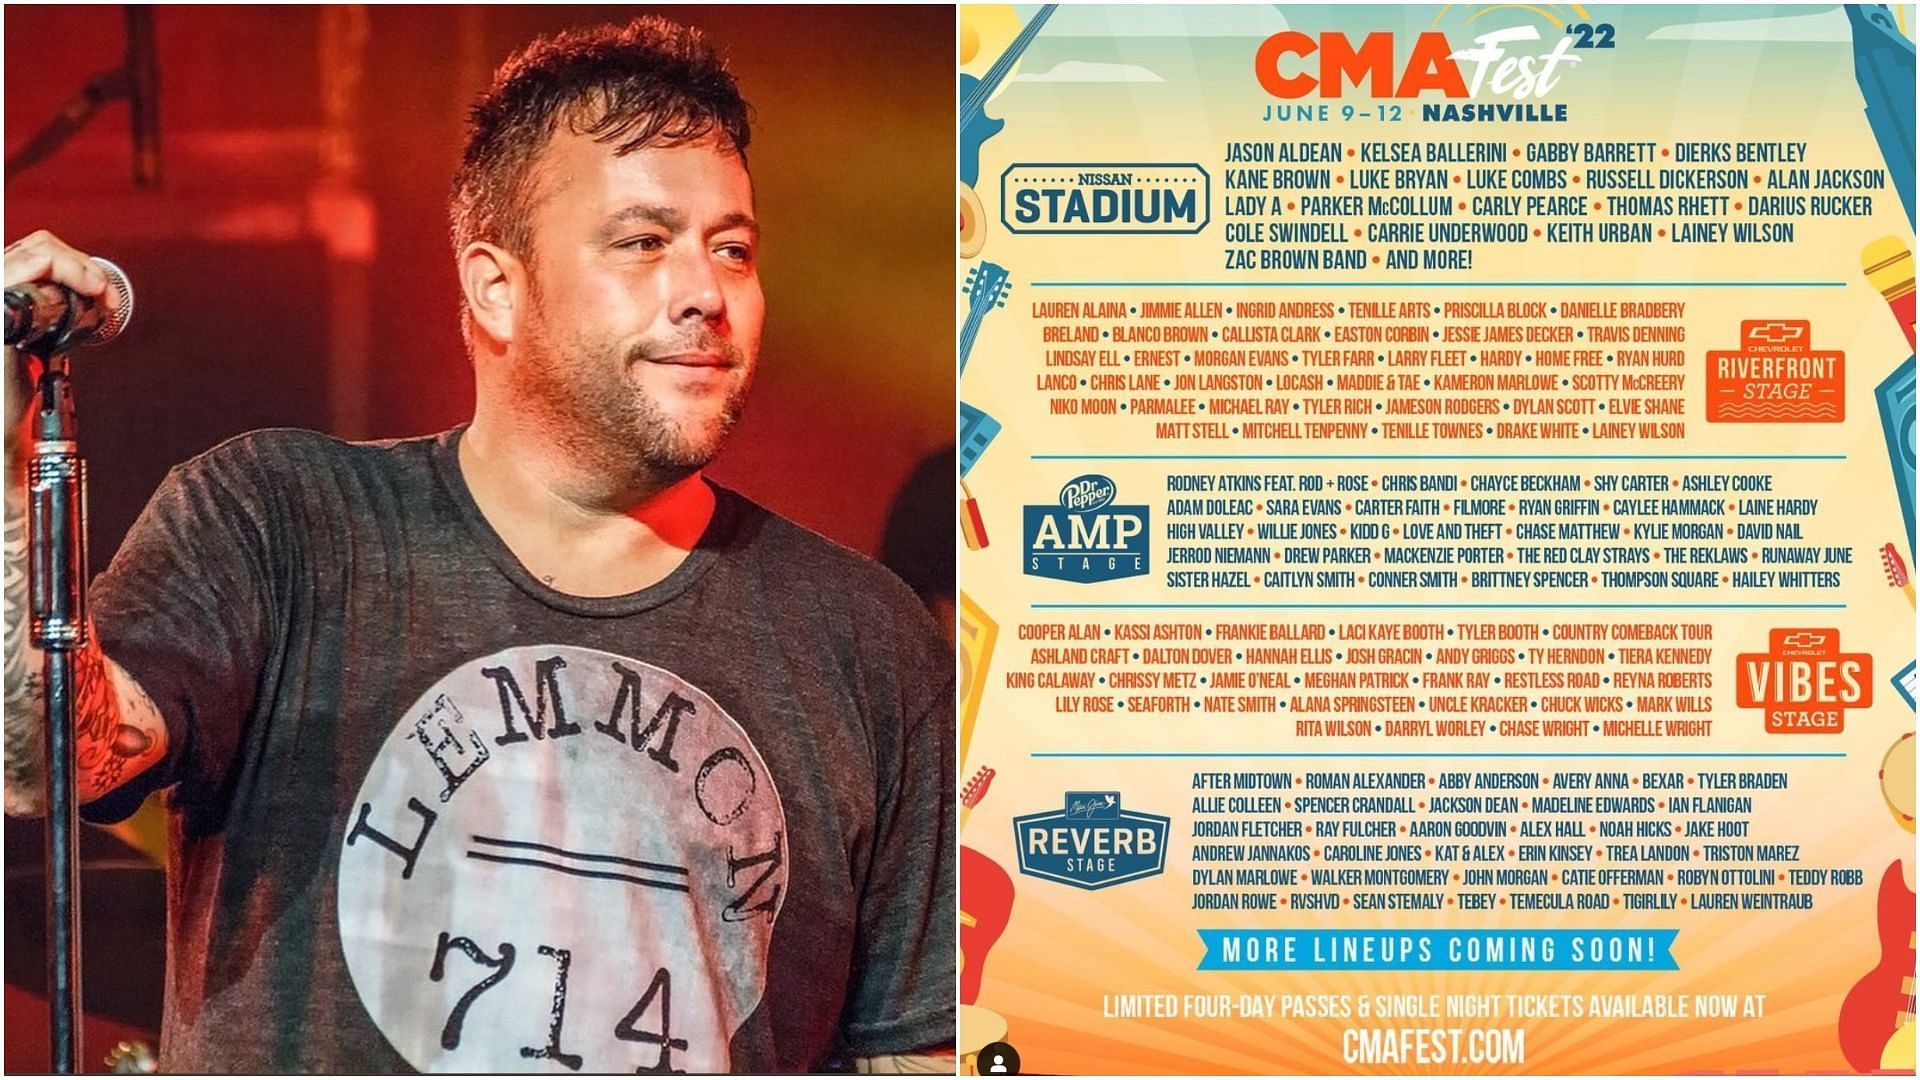 Matthew Shafer or Uncle Kracker is among the performers at the CMA fest this year. (Image via Twitter/ @unclecracker and @cma)